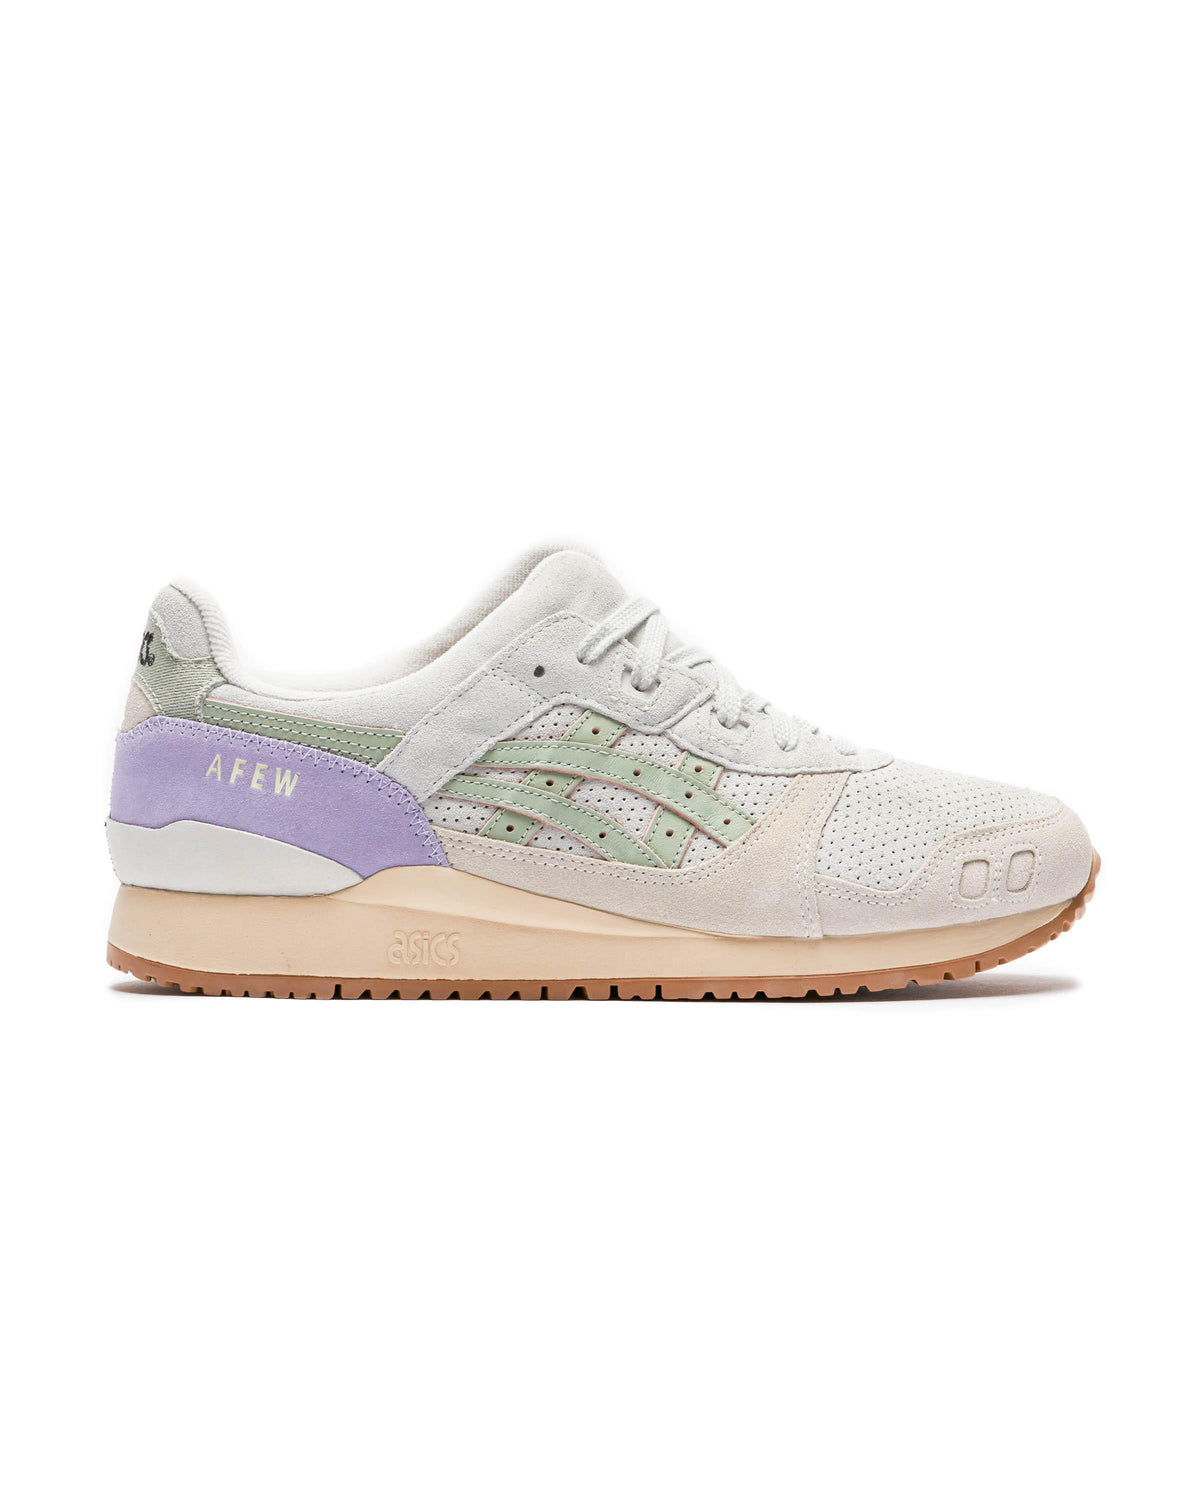 The Asics Gel Lyte 3 From The Whisper Pink Pack Is Looking Smooth